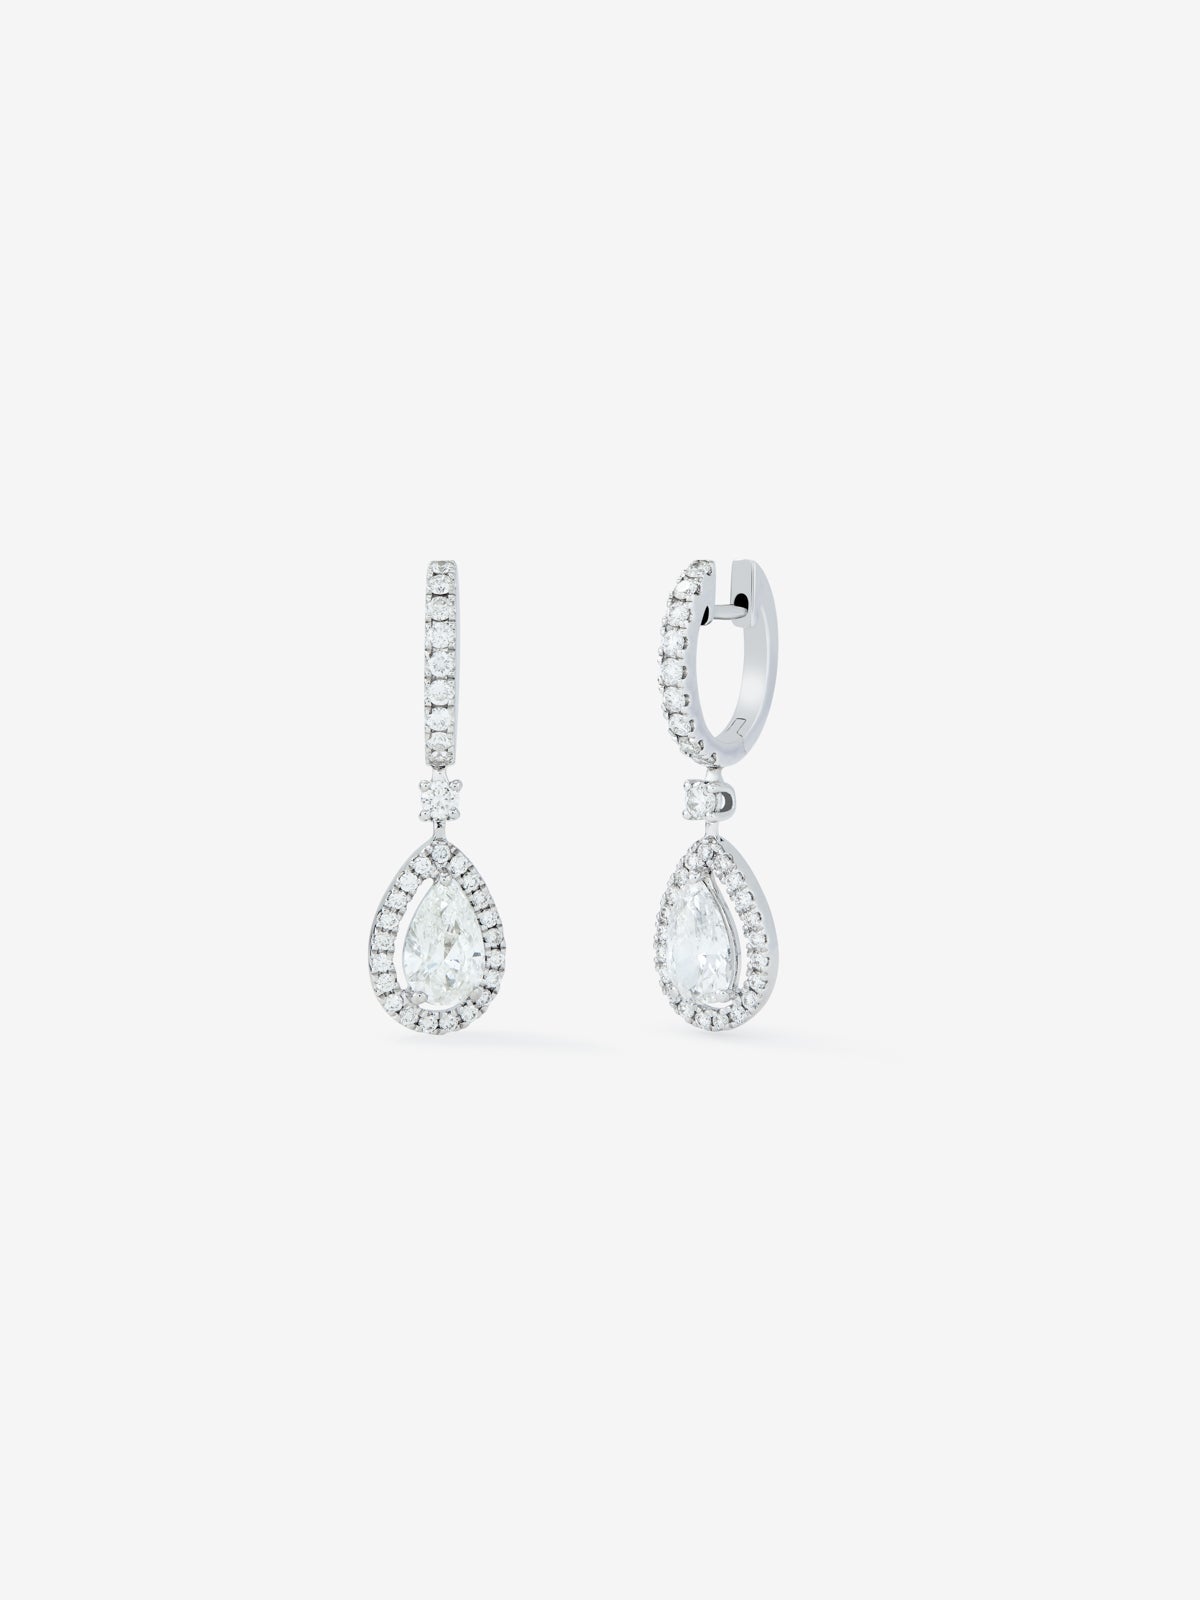 18K white gold earrings with 2 pear-cut diamonds with a total of 0.3 cts and 48 brilliant-cut diamonds of 0.38 cts